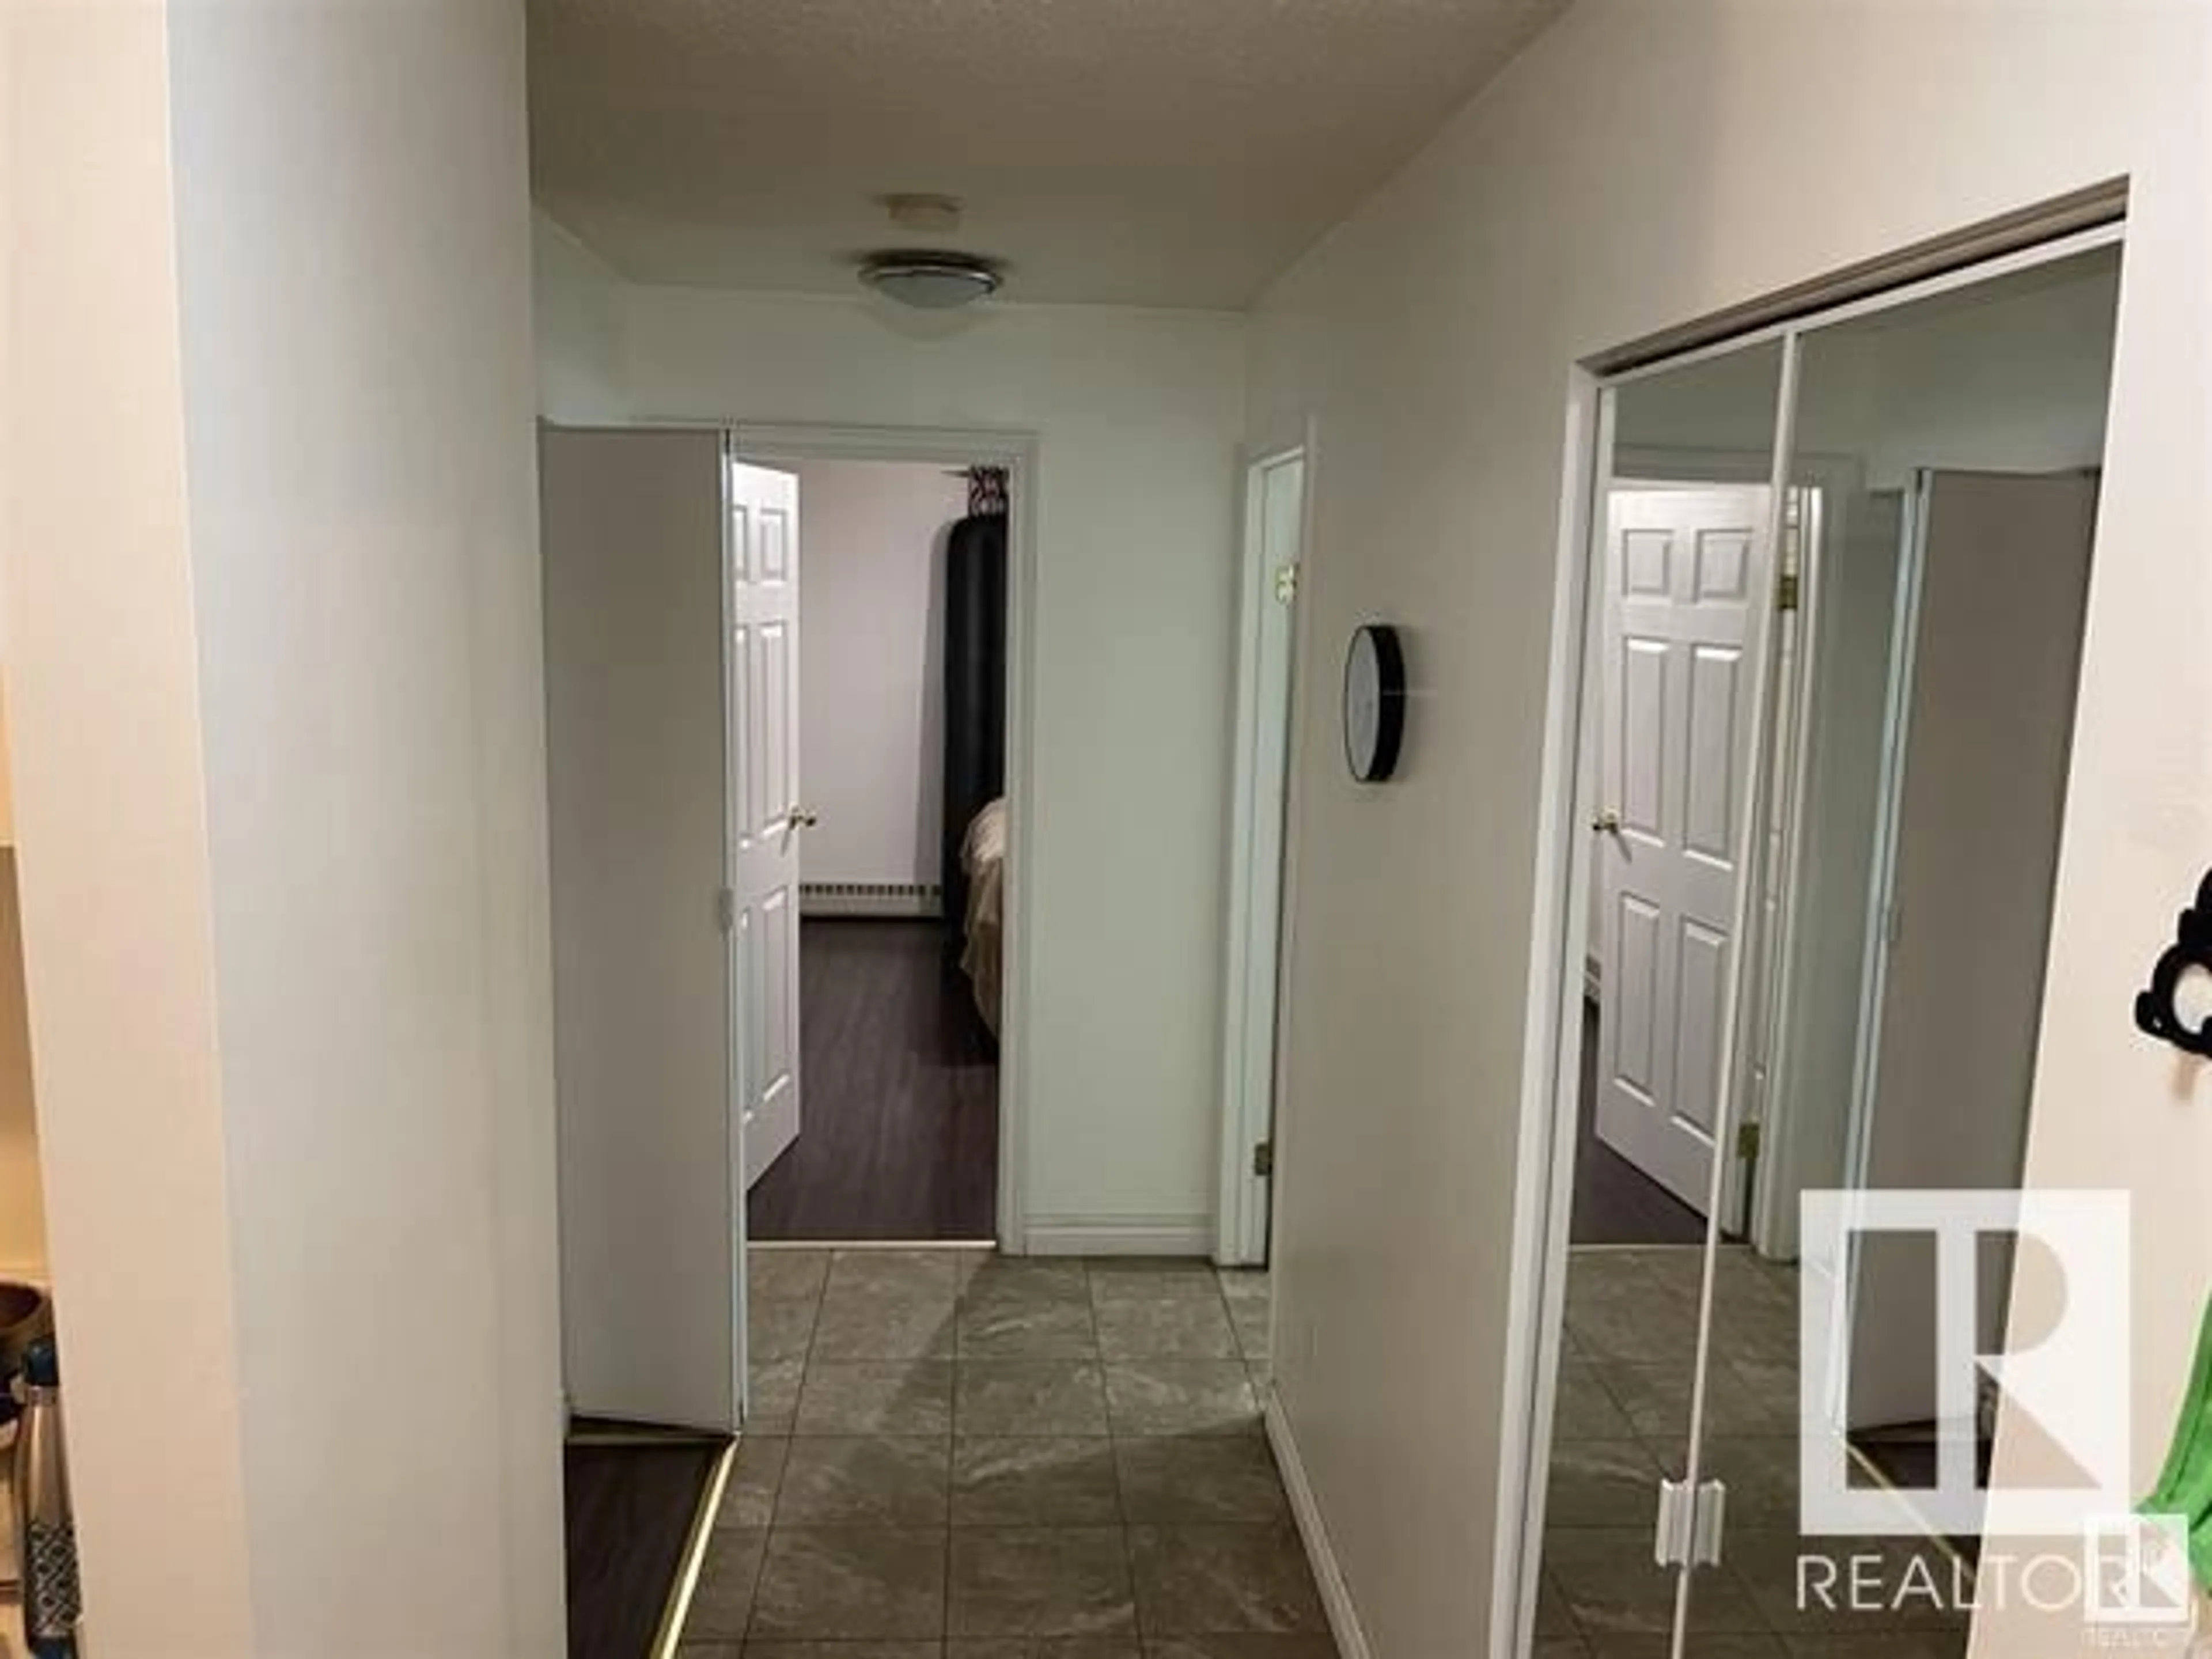 A pic of a room for #135 2520 50 ST NW, Edmonton Alberta T6L7A8